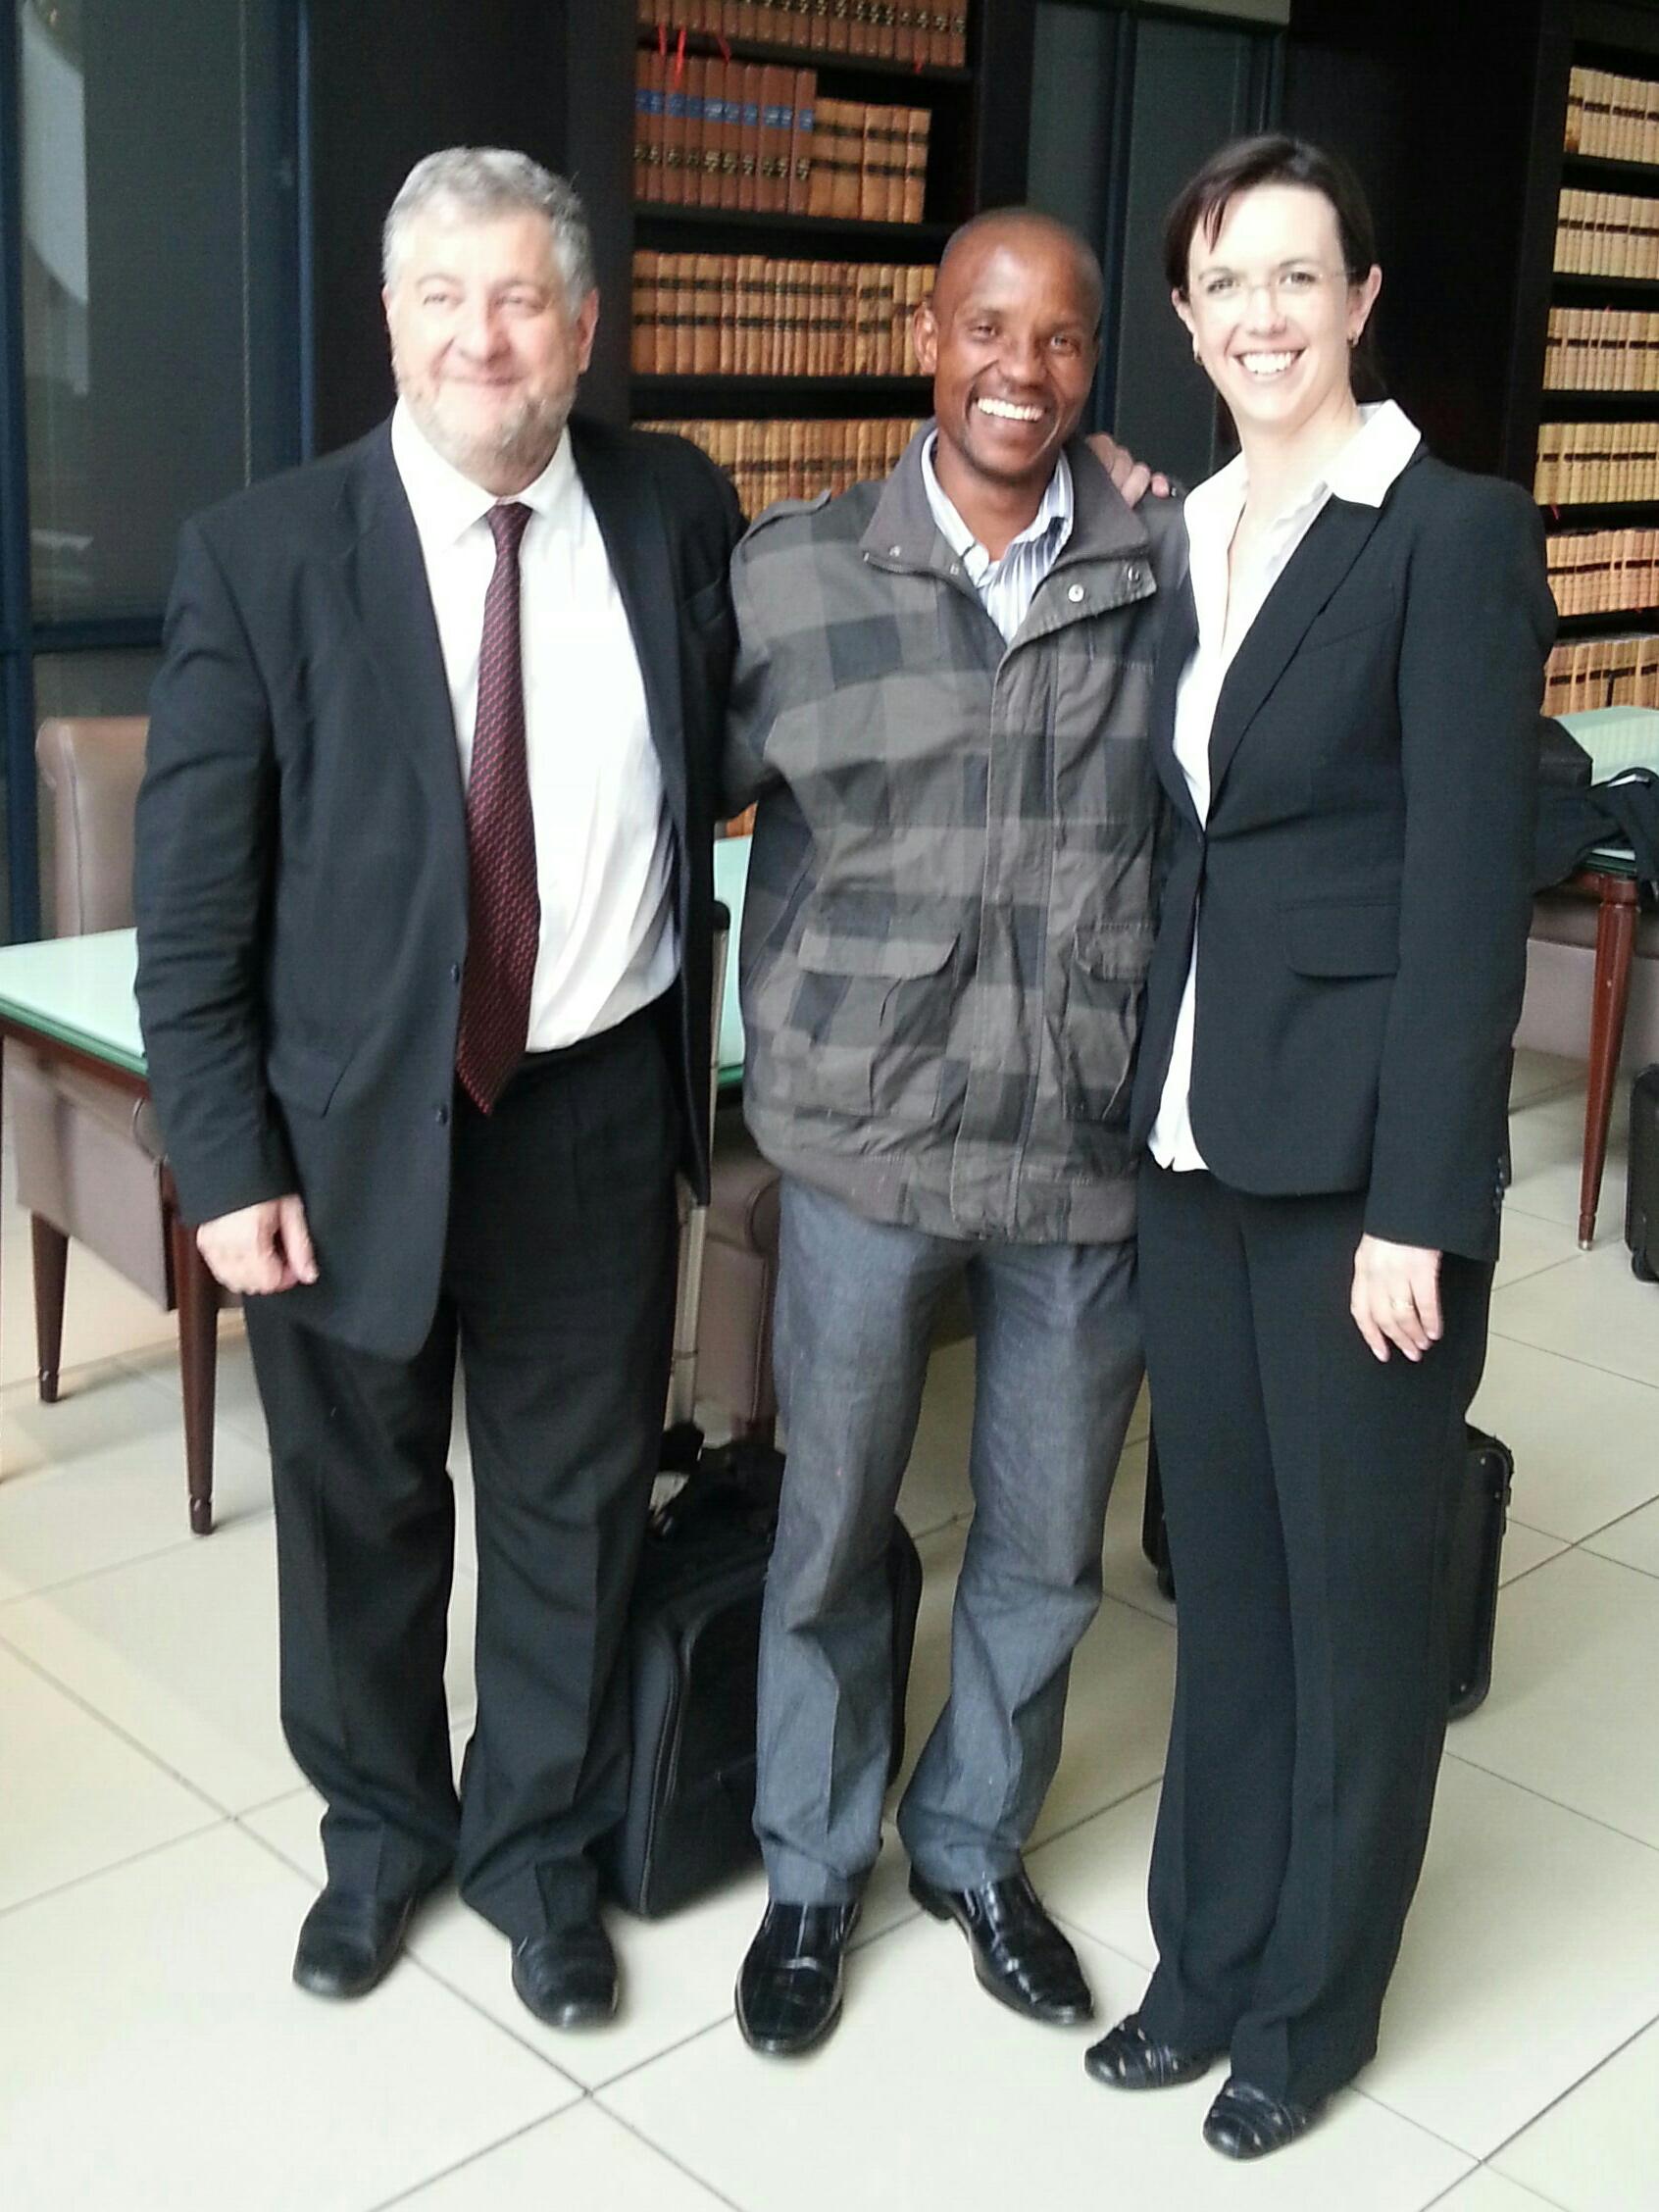 Attorneys Twitter: "RT Proud to represent a man of integrity with Advocates Gilbert Marcus &amp; Kate Hofmeyr http://t.co/k88QON2cII" / Twitter